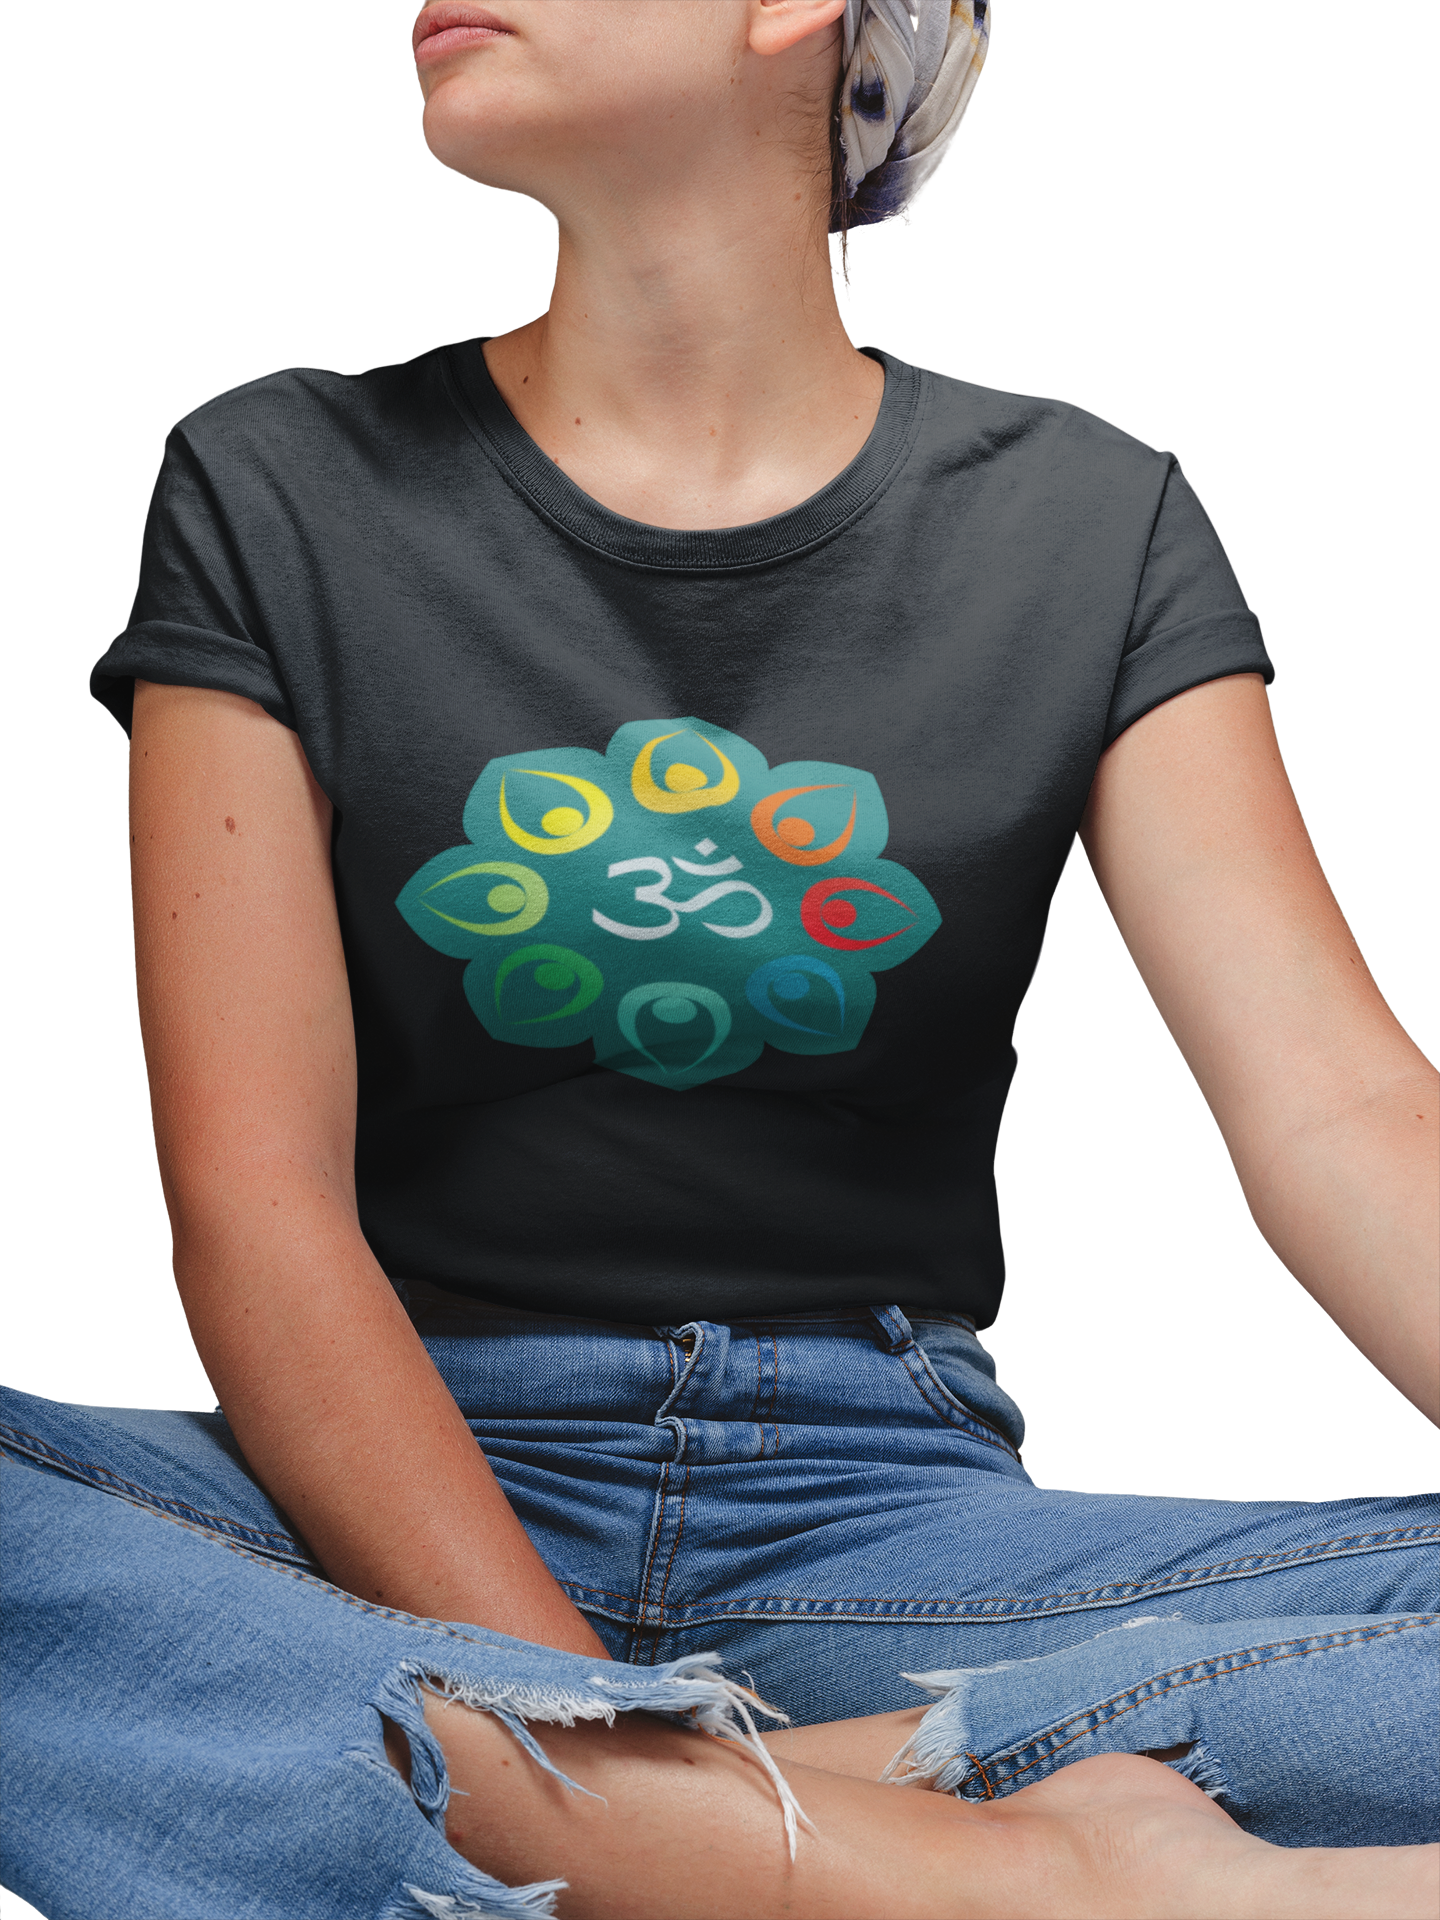 Black T-shirt for women printed with Om graphic design